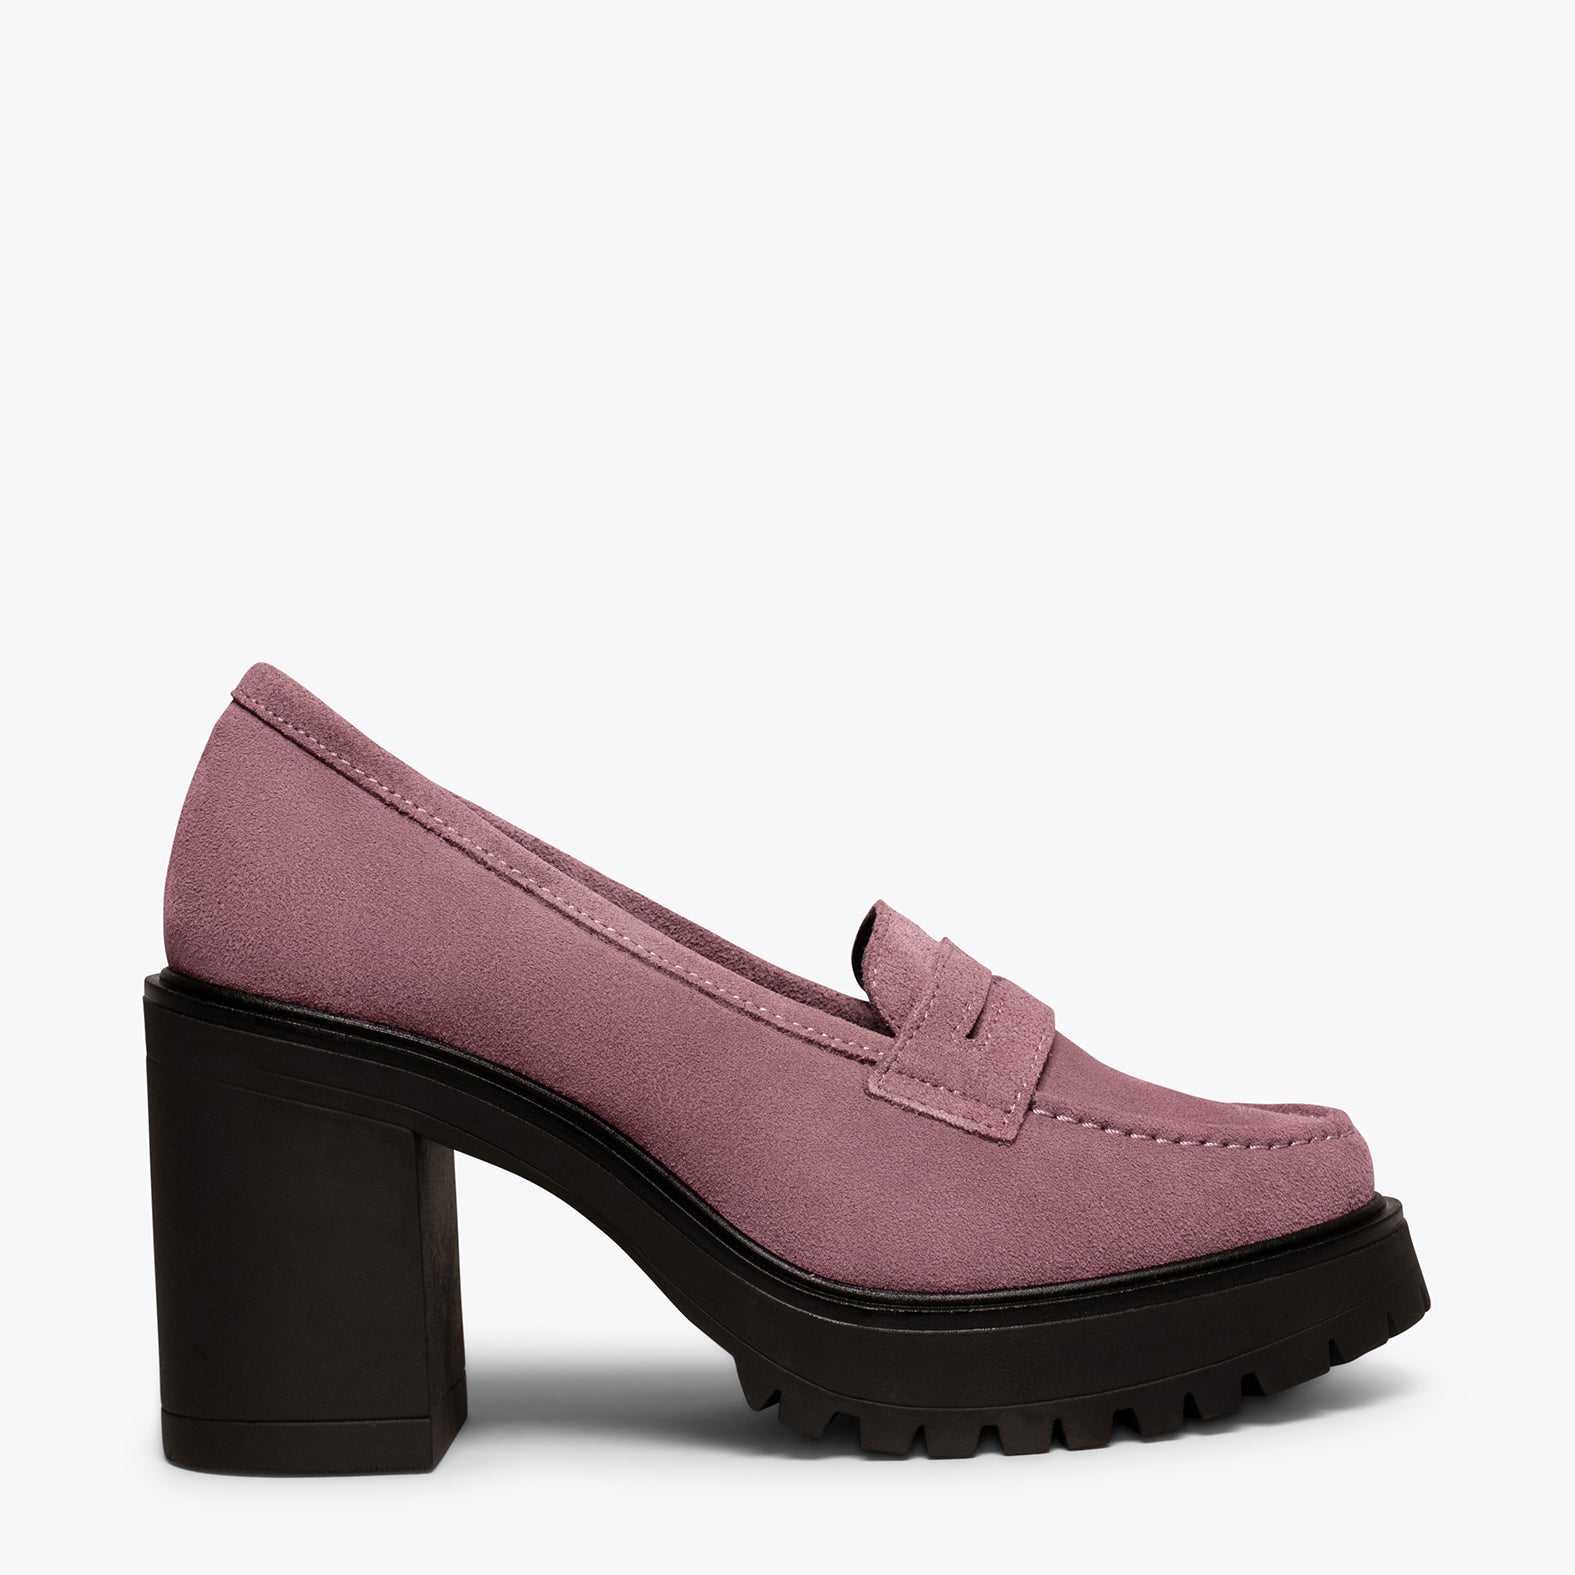 TRACK – NUDE high heel moccasin with track sole